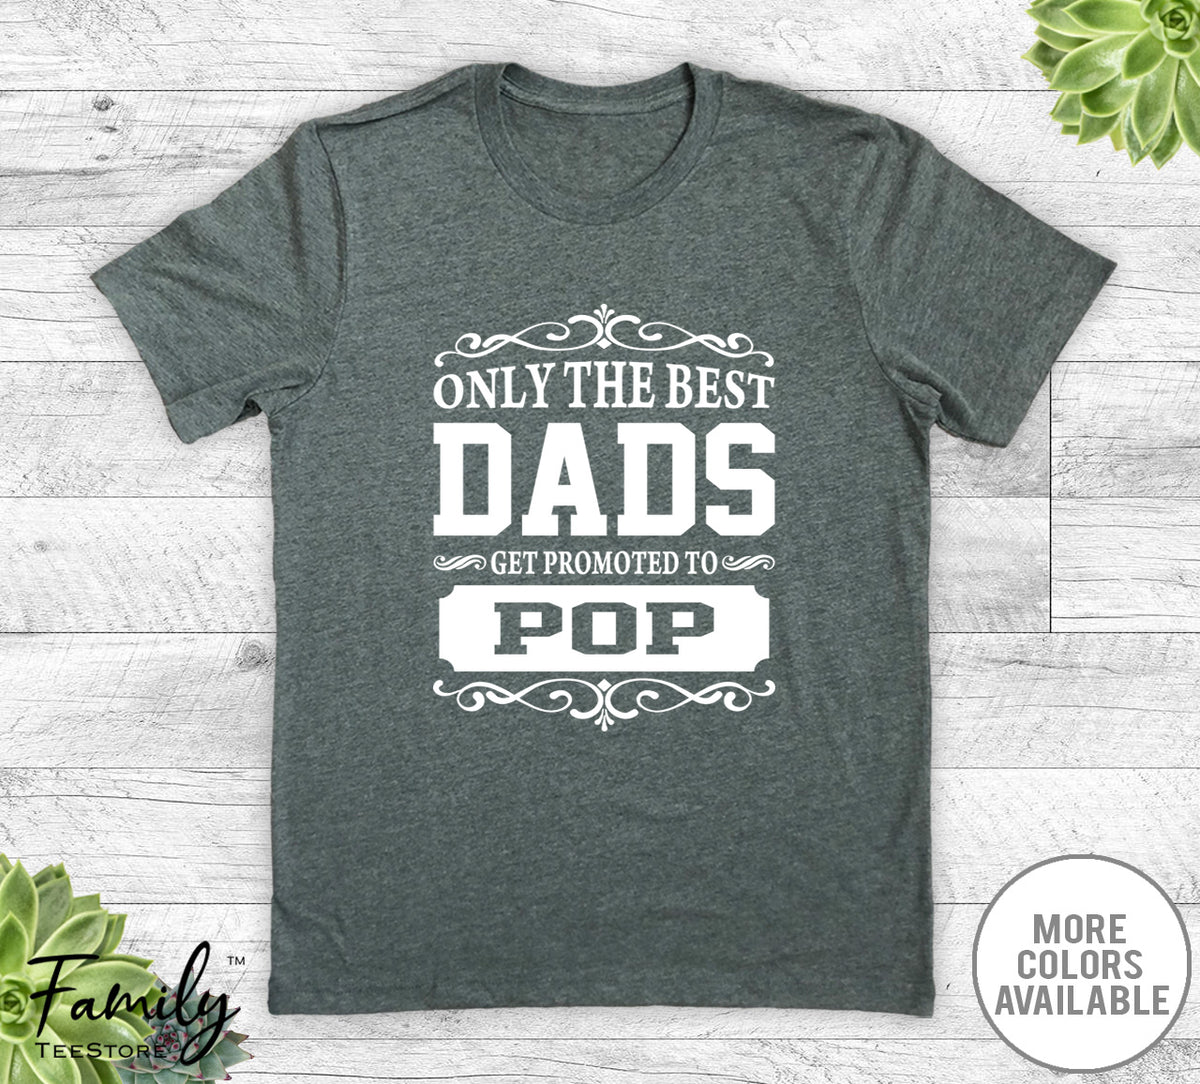 Only The Best Dads Get Promoted To Pop - Unisex T-shirt - Pop Shirt - Pop Gift